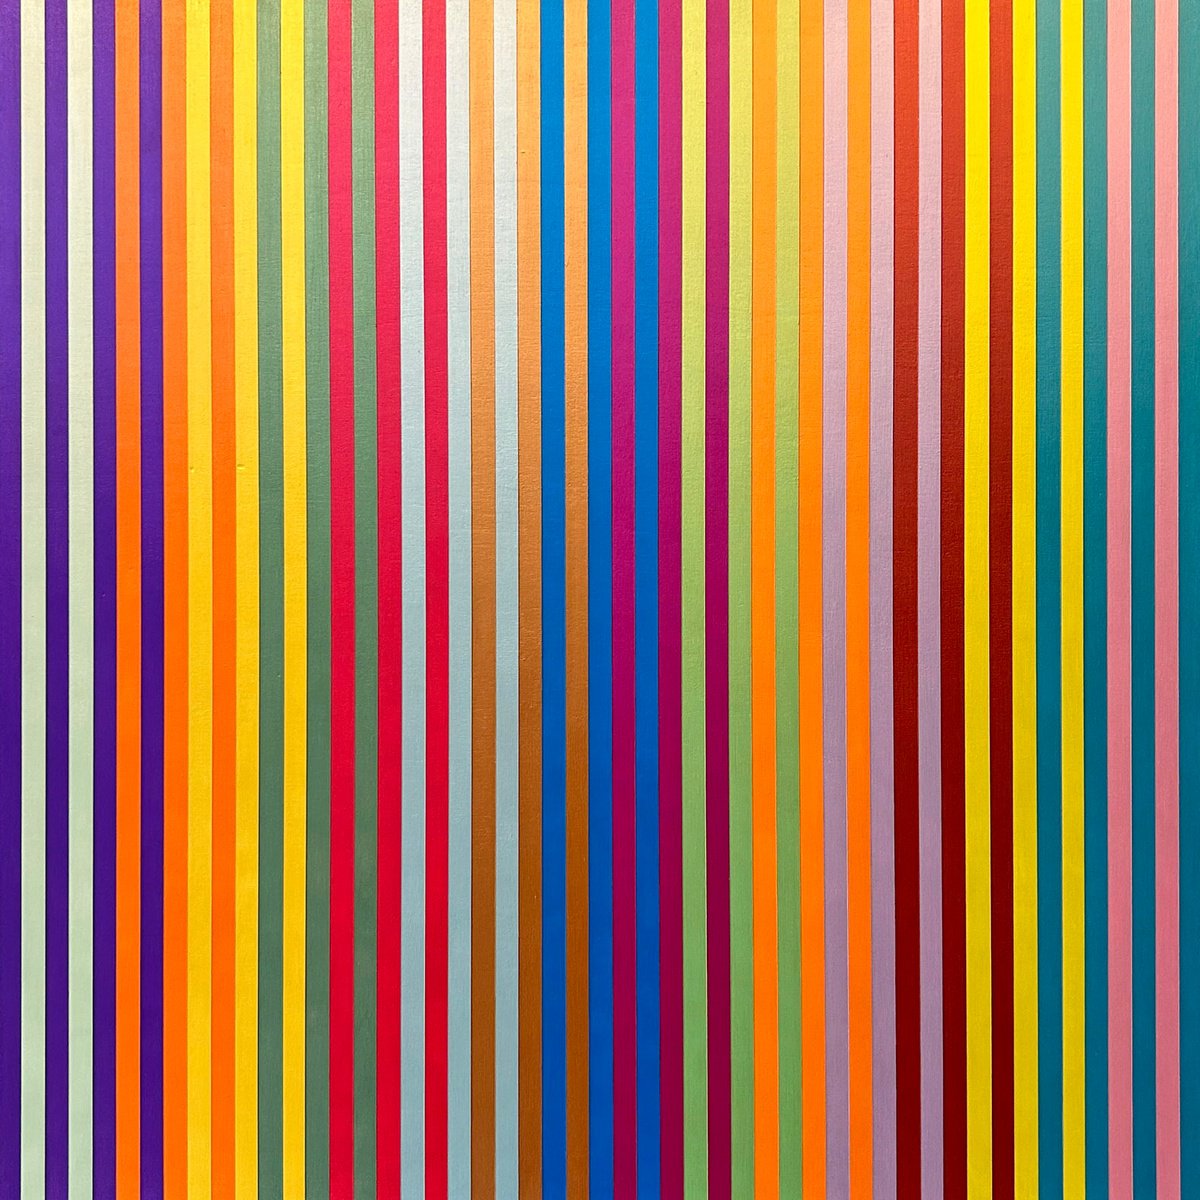 Stripes No.32 by Crispin Holder